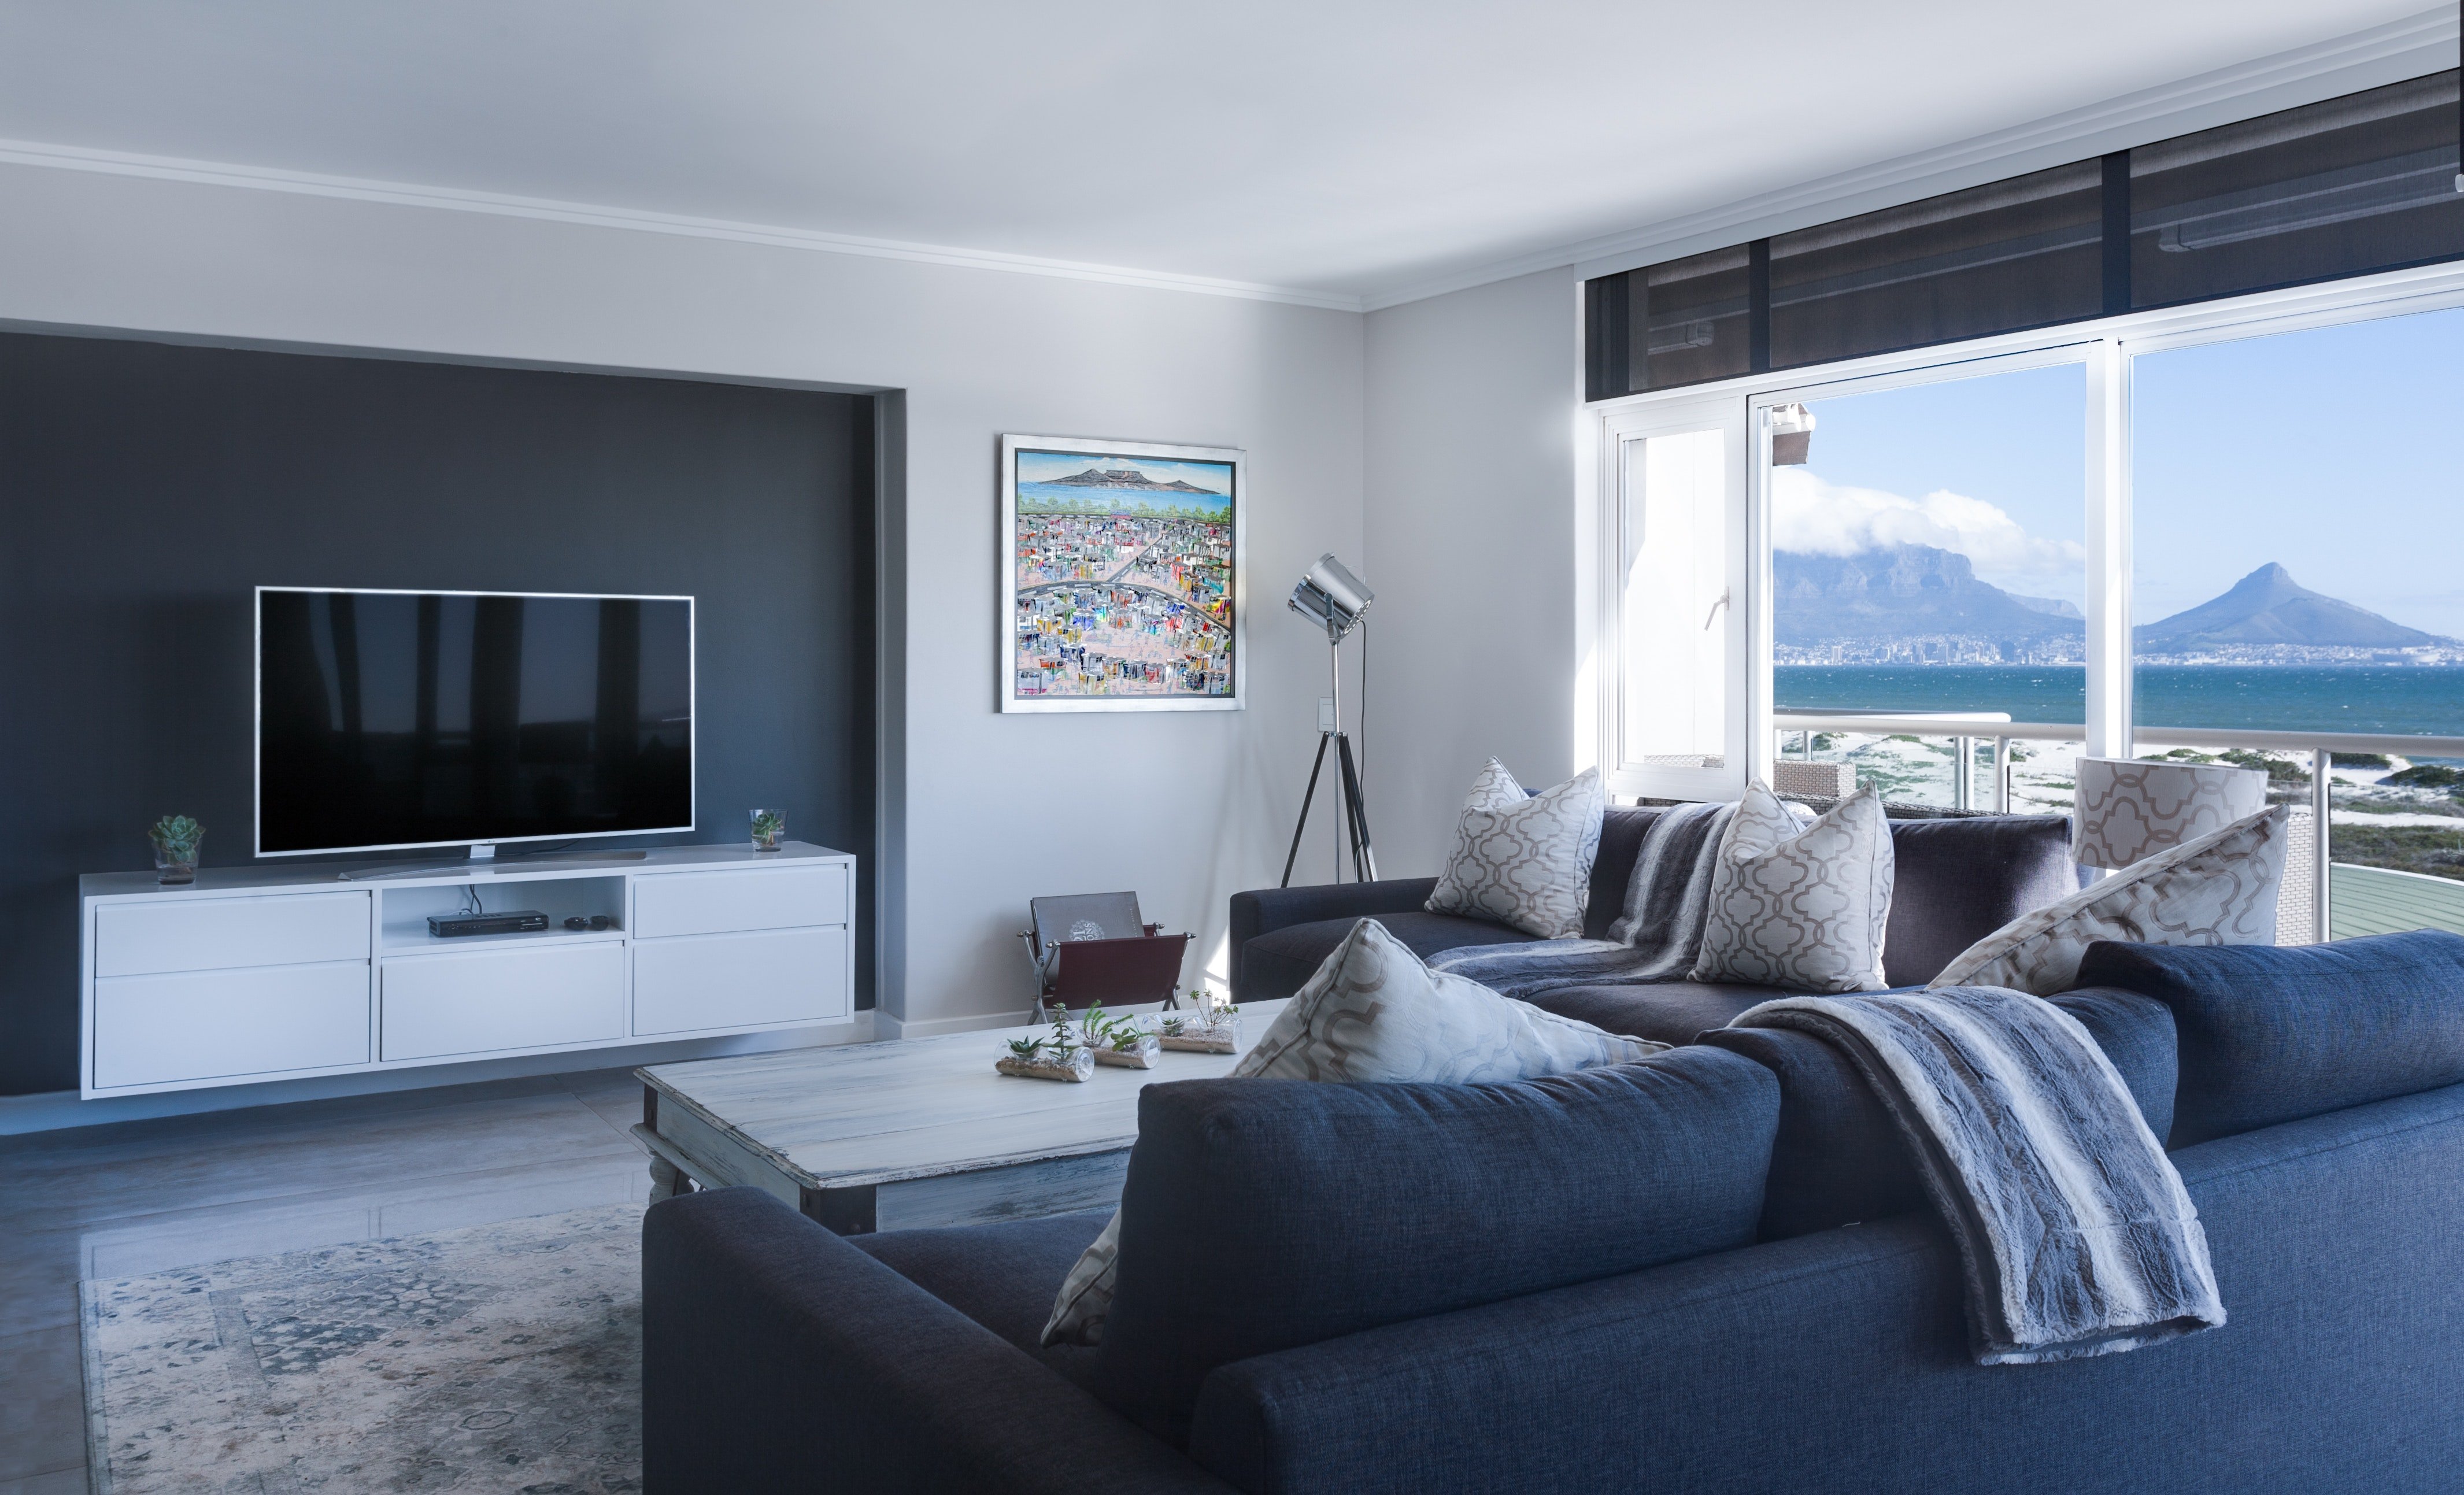 Pictured - A living room with an ocean view | Source: Pexels